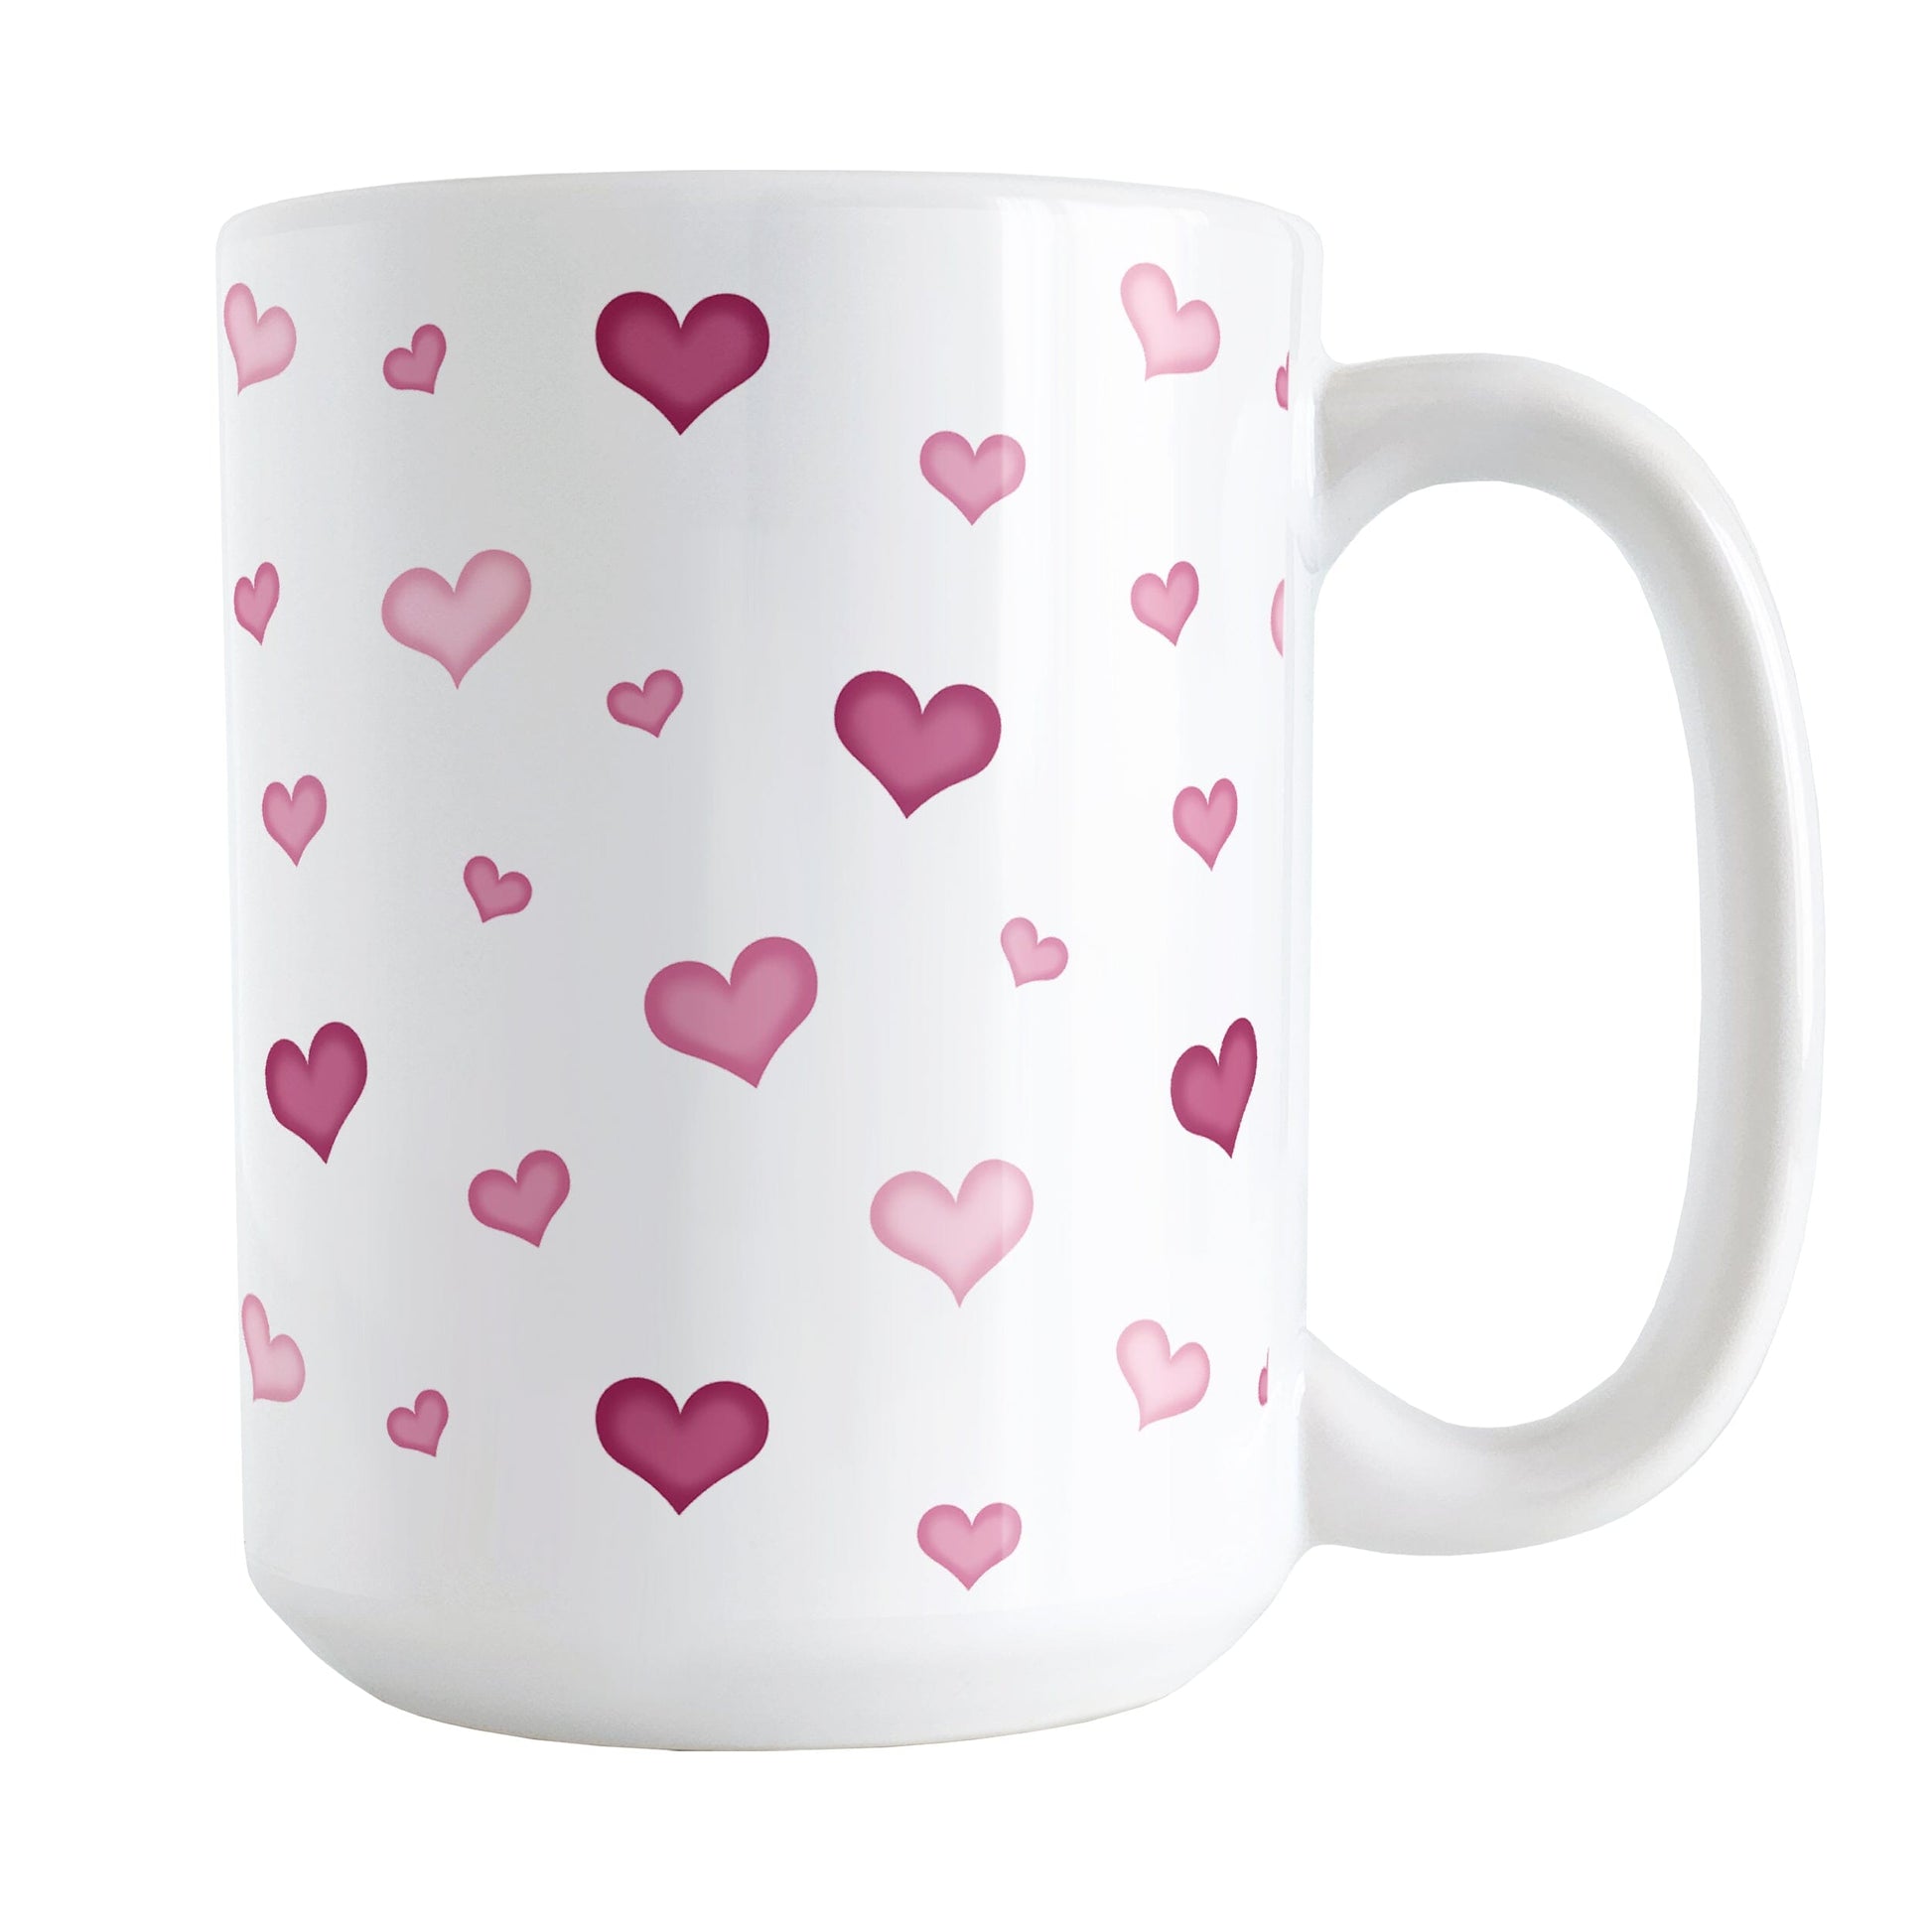 Dainty Cute Pink Hearts Mug (15oz) at Amy's Coffee Mugs. A ceramic coffee mug designed with a print of cute and dainty hand-drawn pink hearts in different shades of pink in a pattern that wraps around the mug up to the handle. 